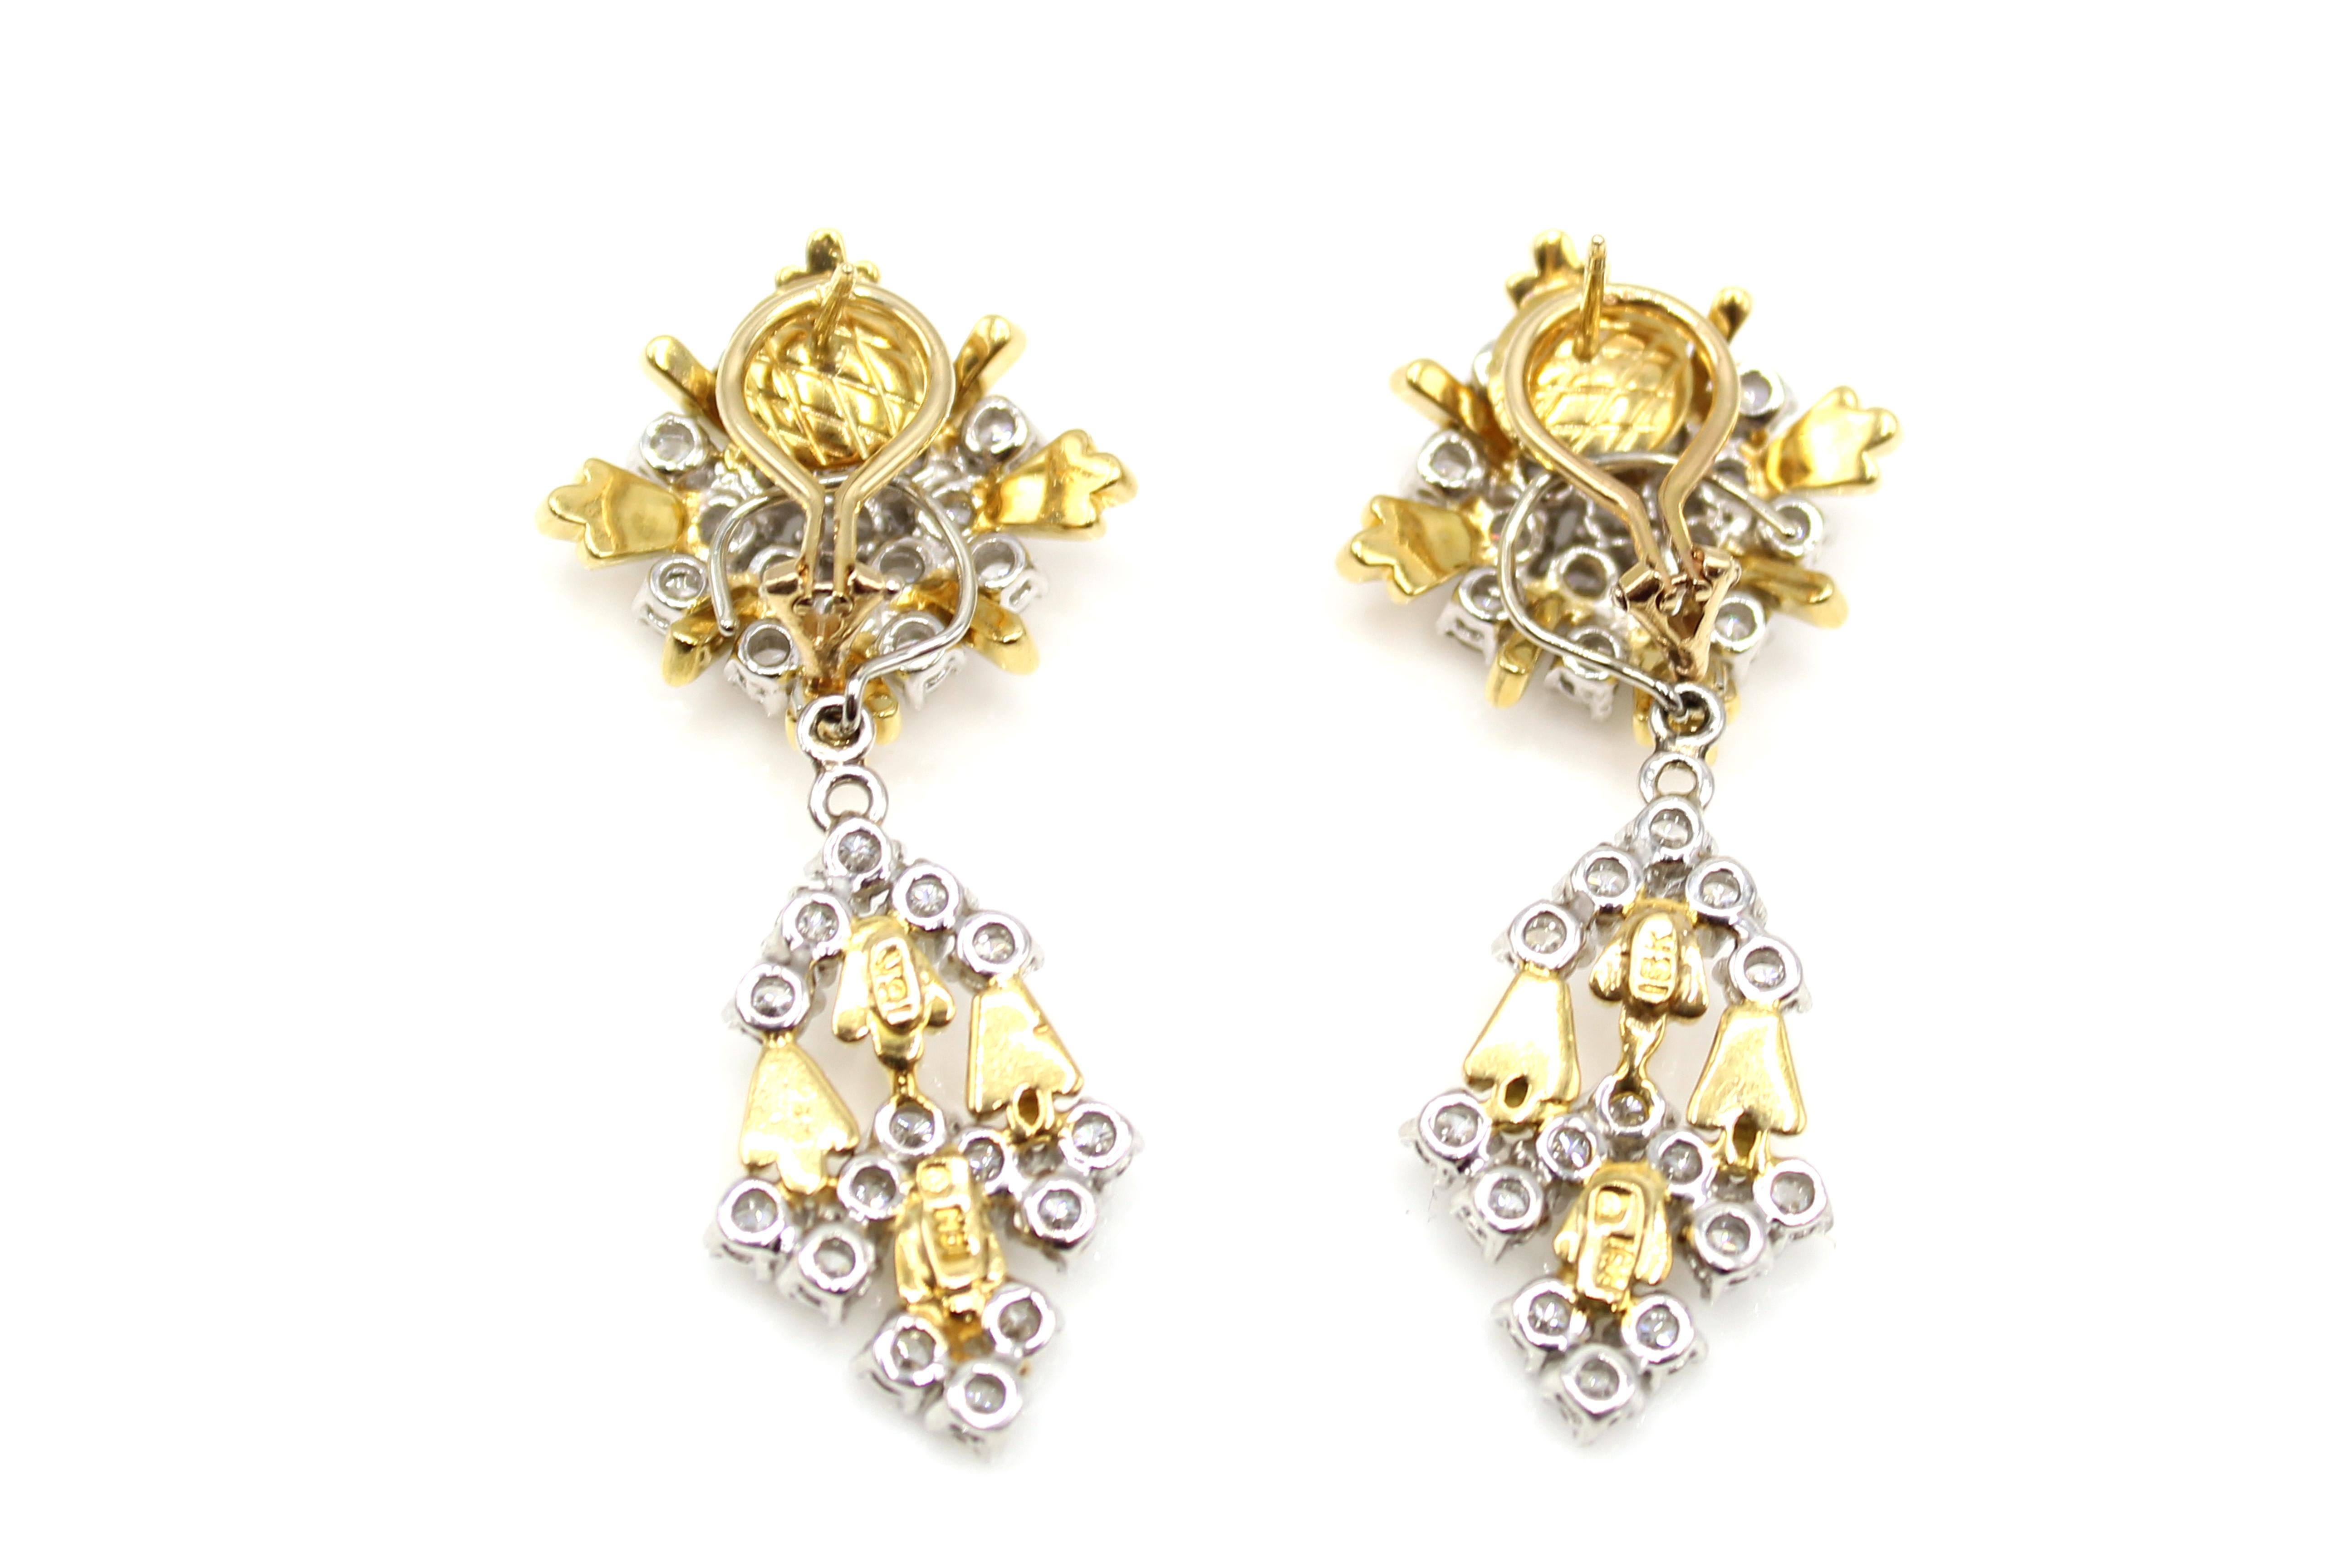 Masterfully hand-crafted in 18 karat white and yellow gold, these gorgeous 1980s stylish earrings can be worn as stunning evening ear-pendants or with the flexible bottom element detachable, as a chic pair of day-time ear clip. The tops designed as